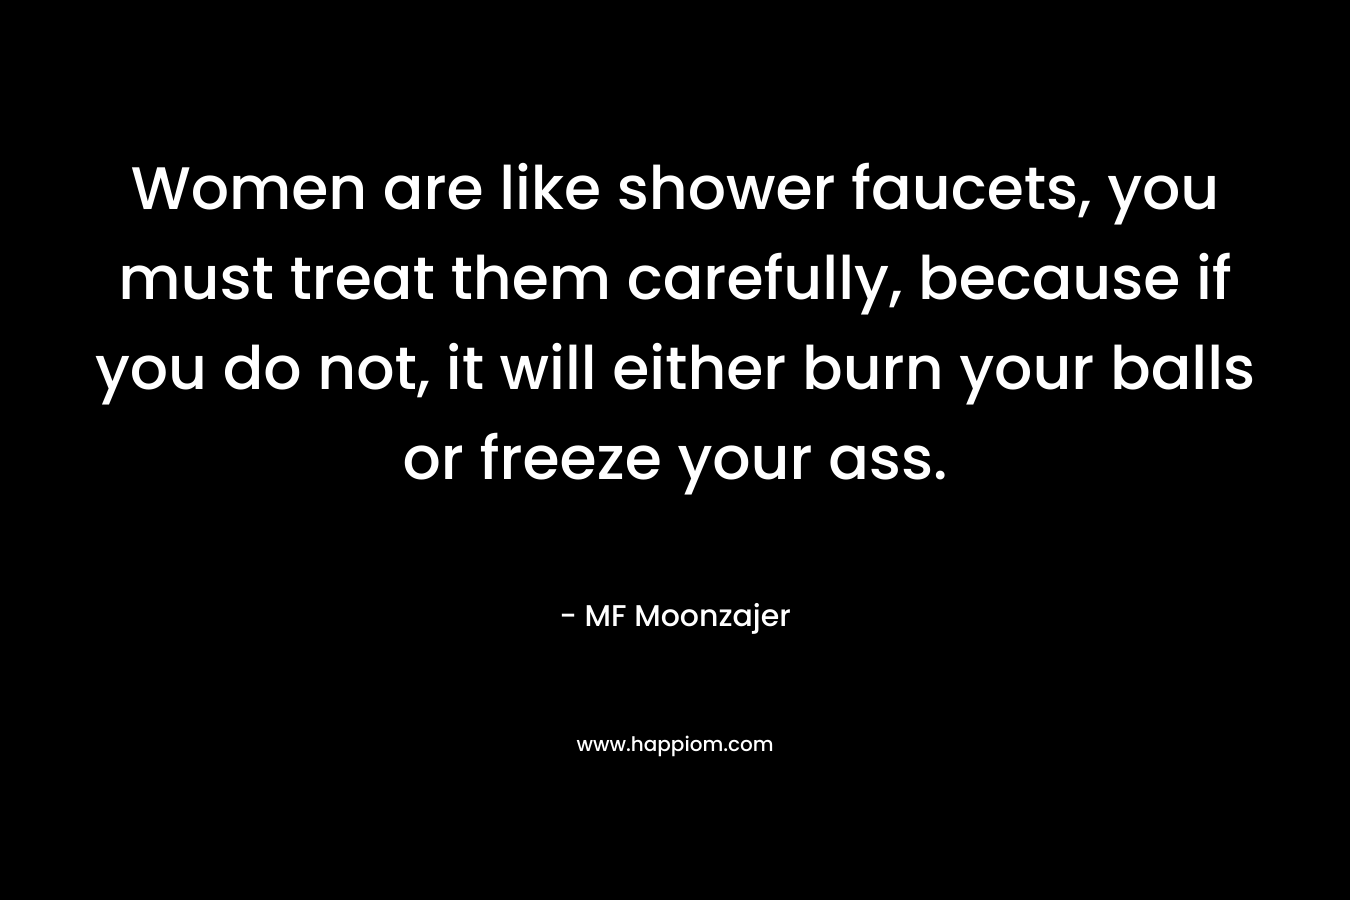 Women are like shower faucets, you must treat them carefully, because if you do not, it will either burn your balls or freeze your ass. – MF Moonzajer